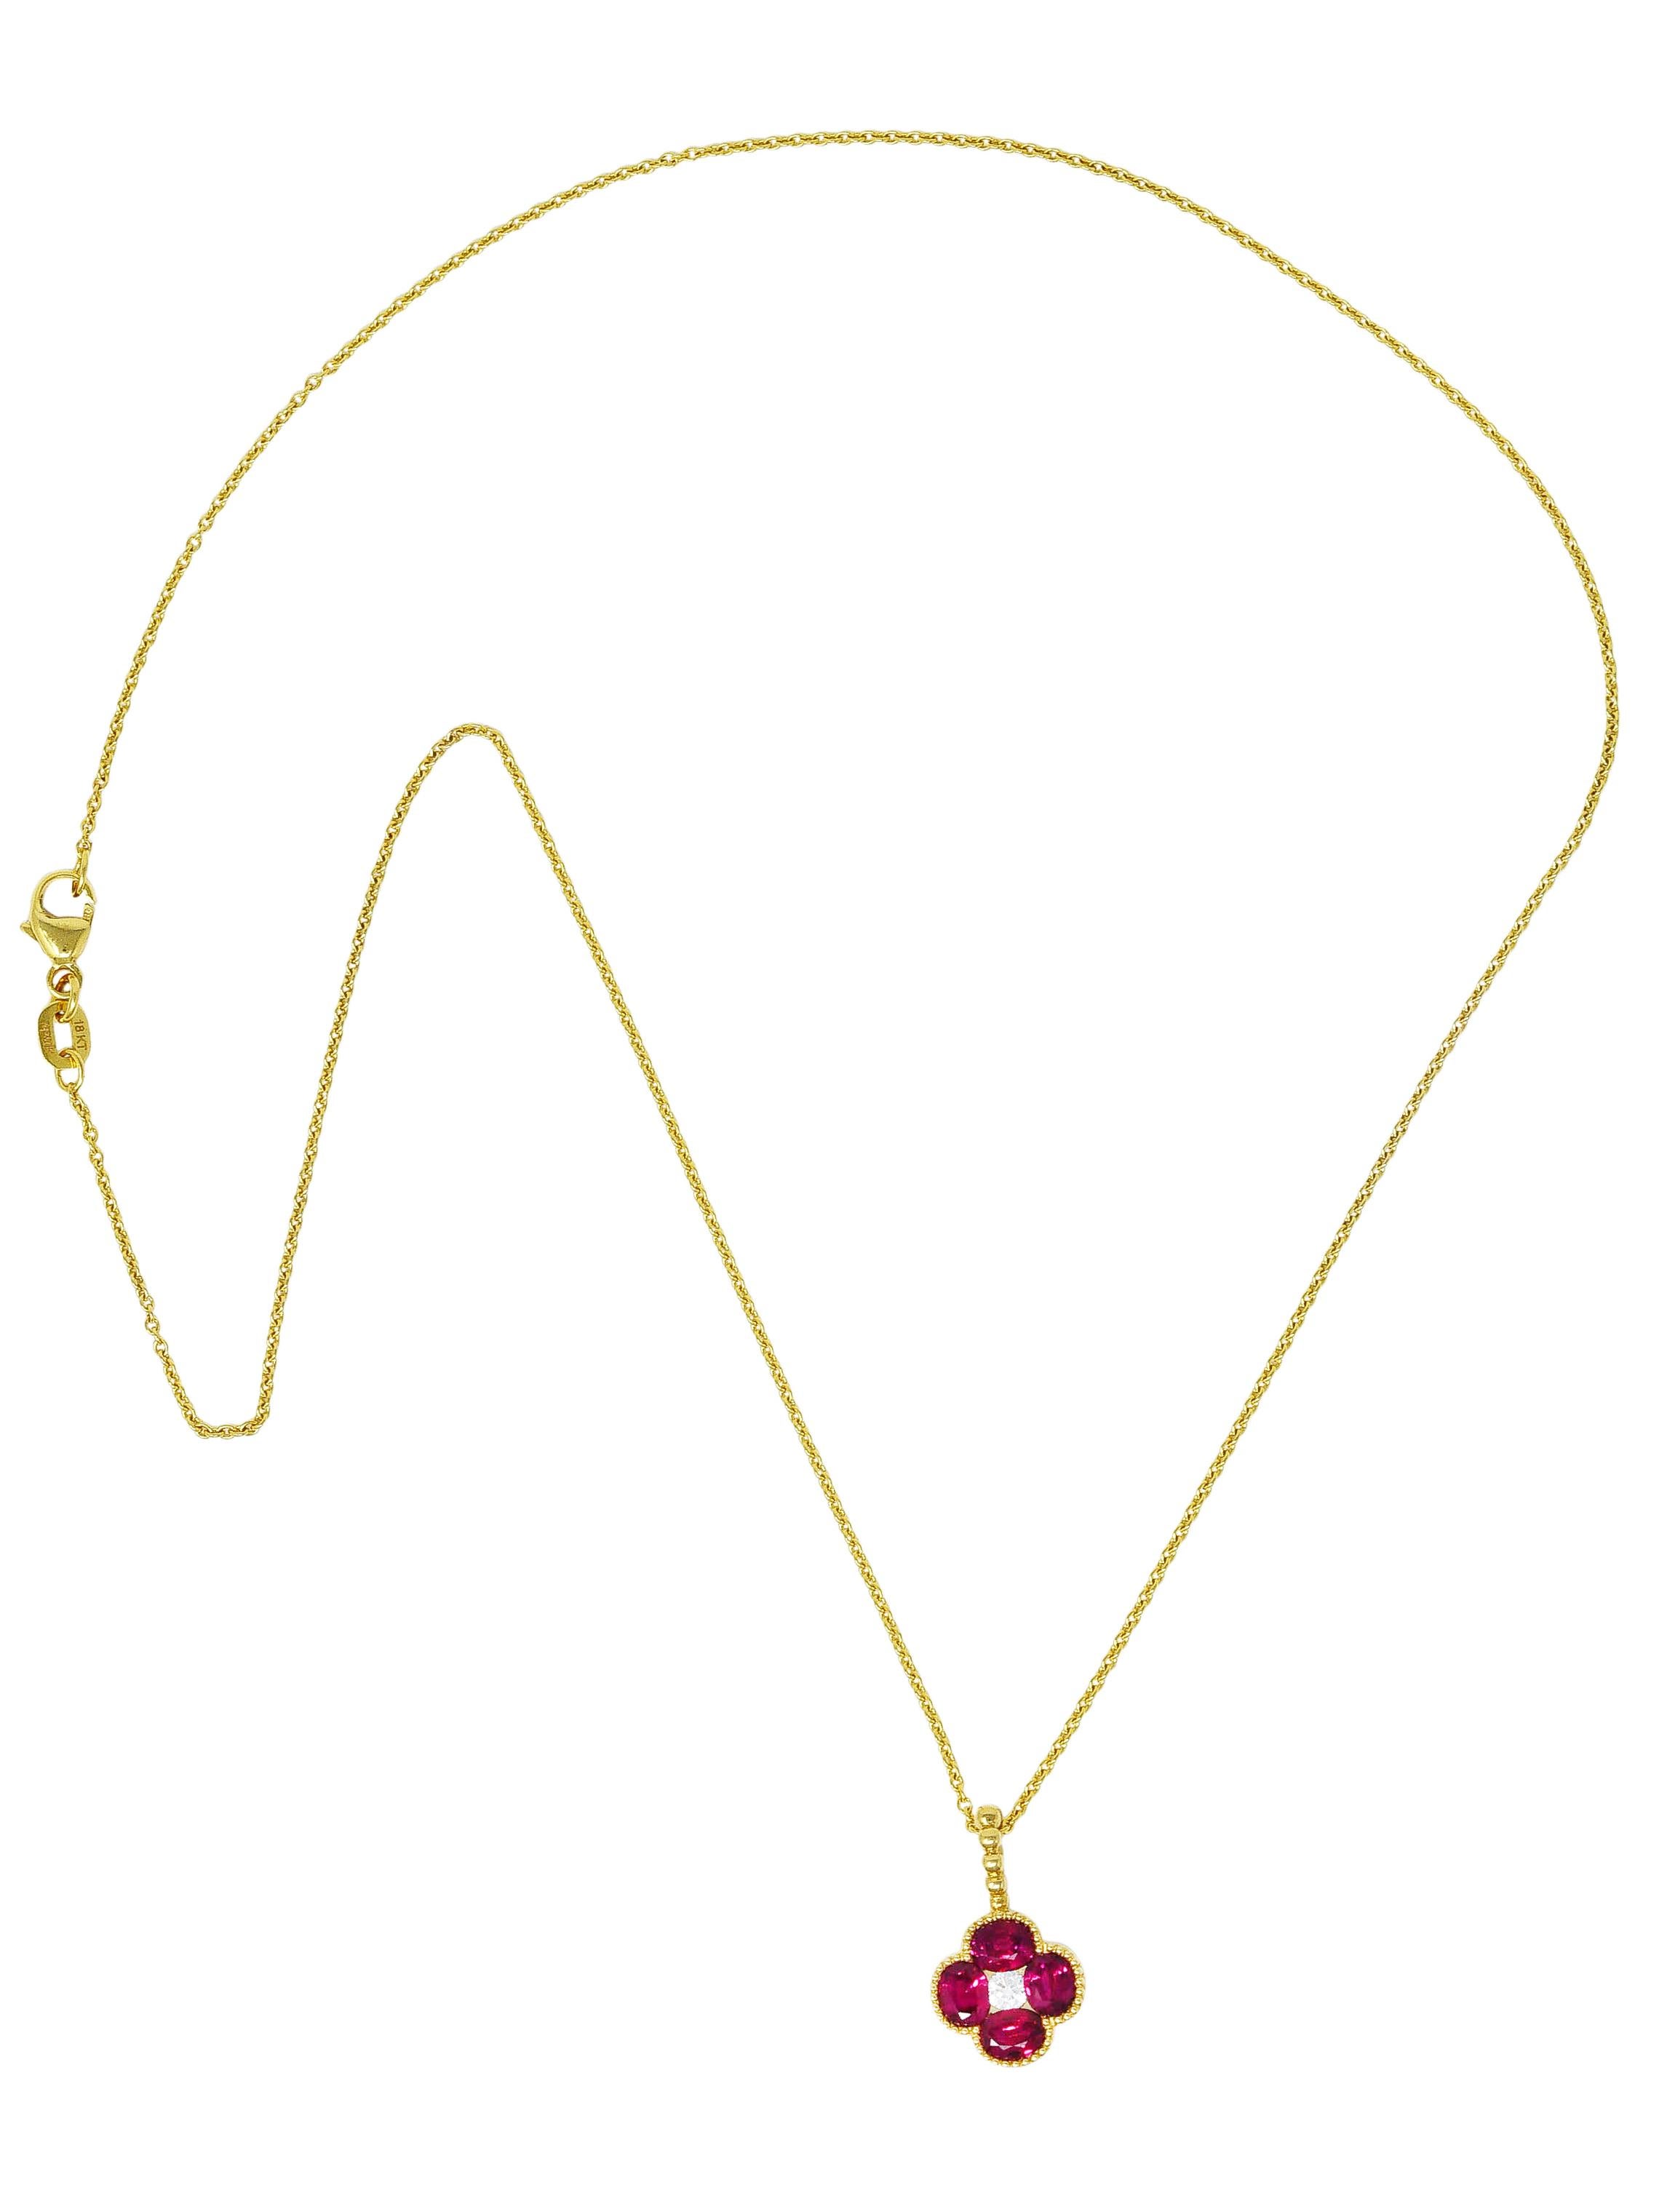 Cable chain necklace features a stylized flower pendant. Petals are comprised of oval cut rubies weighing in total approximately 1.40 carat. Eye clean and very well matched in strongly purplish red color. Centering a round brilliant cut diamond